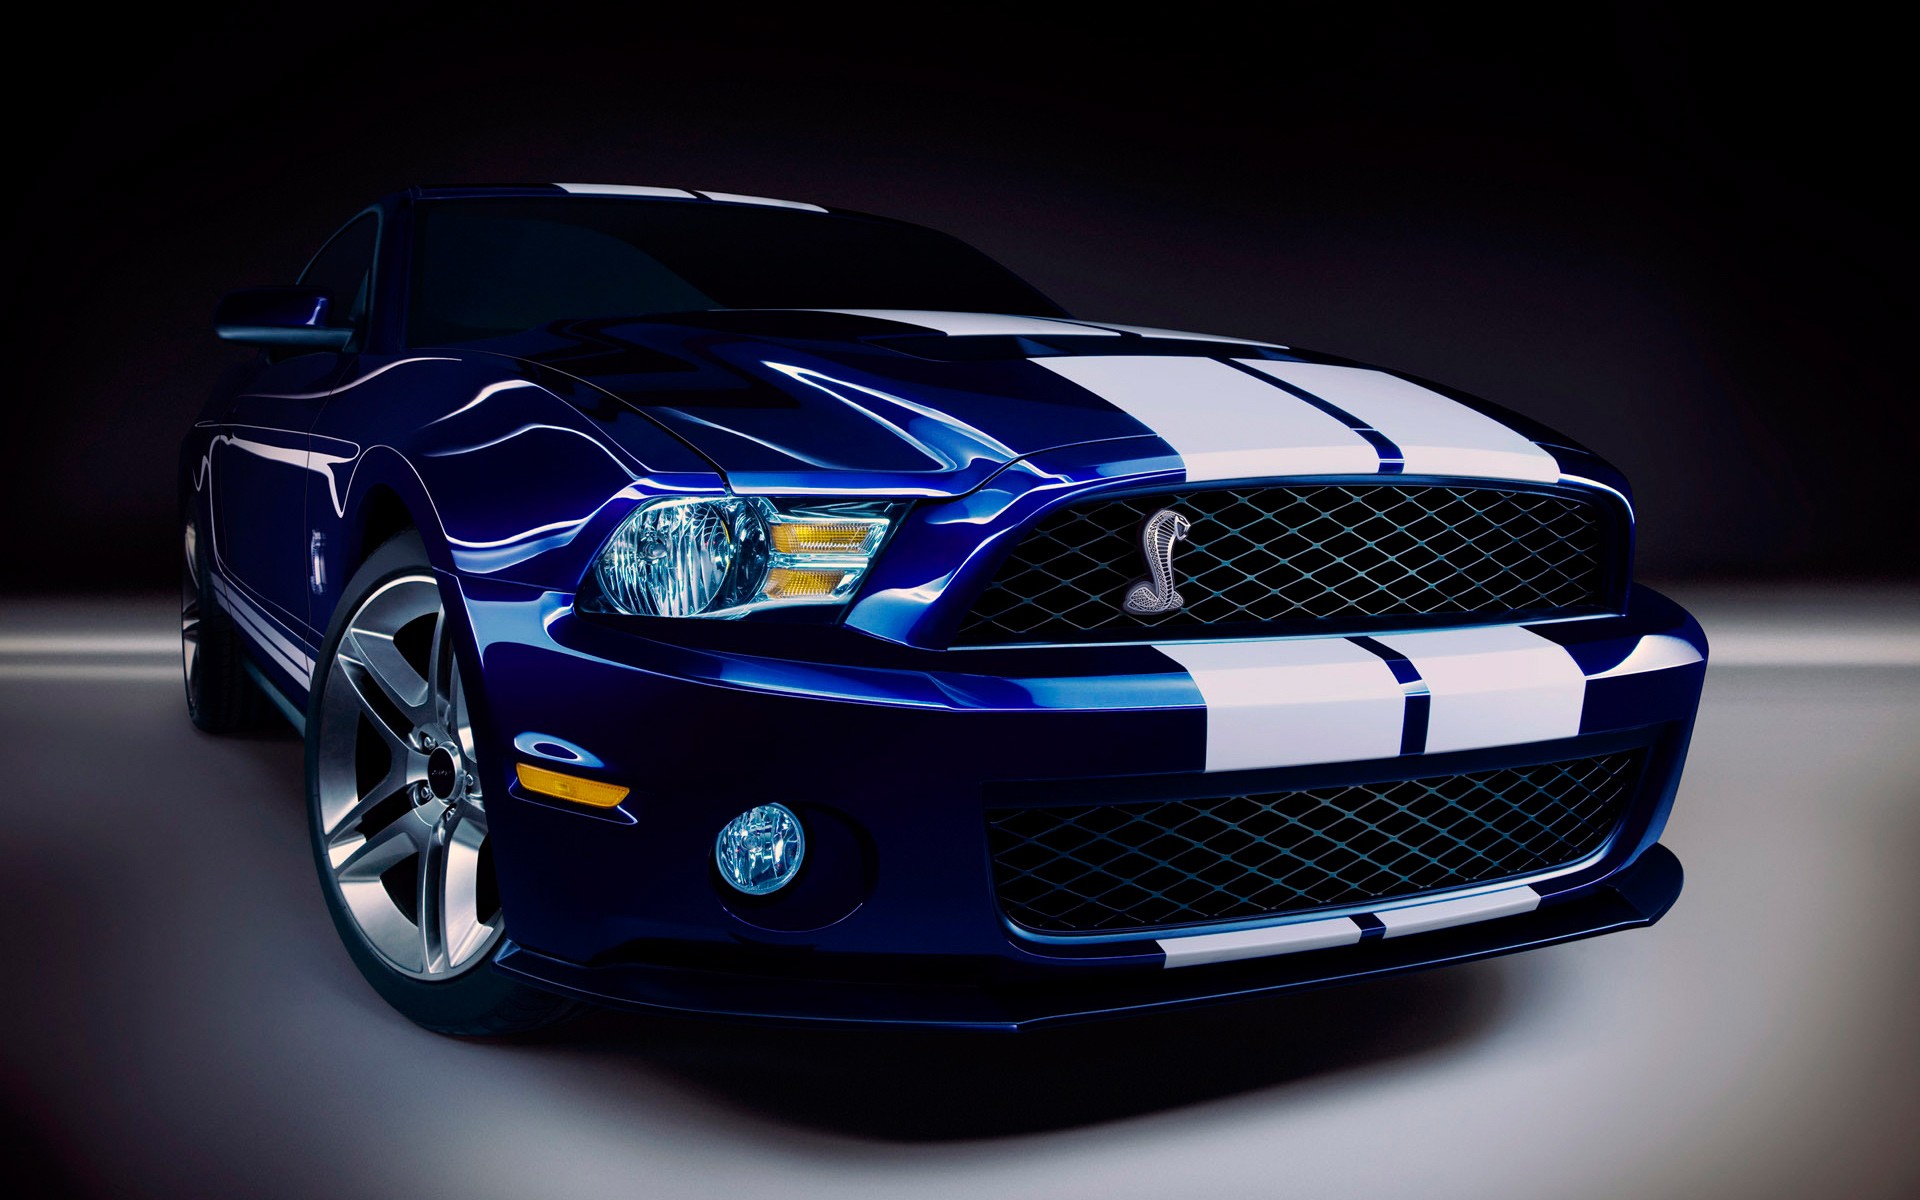 General 1920x1200 car Ford Mustang Ford Mustang Shelby Ford Mustang S-197 II Ford blue cars vehicle dark background racing stripes American cars muscle cars